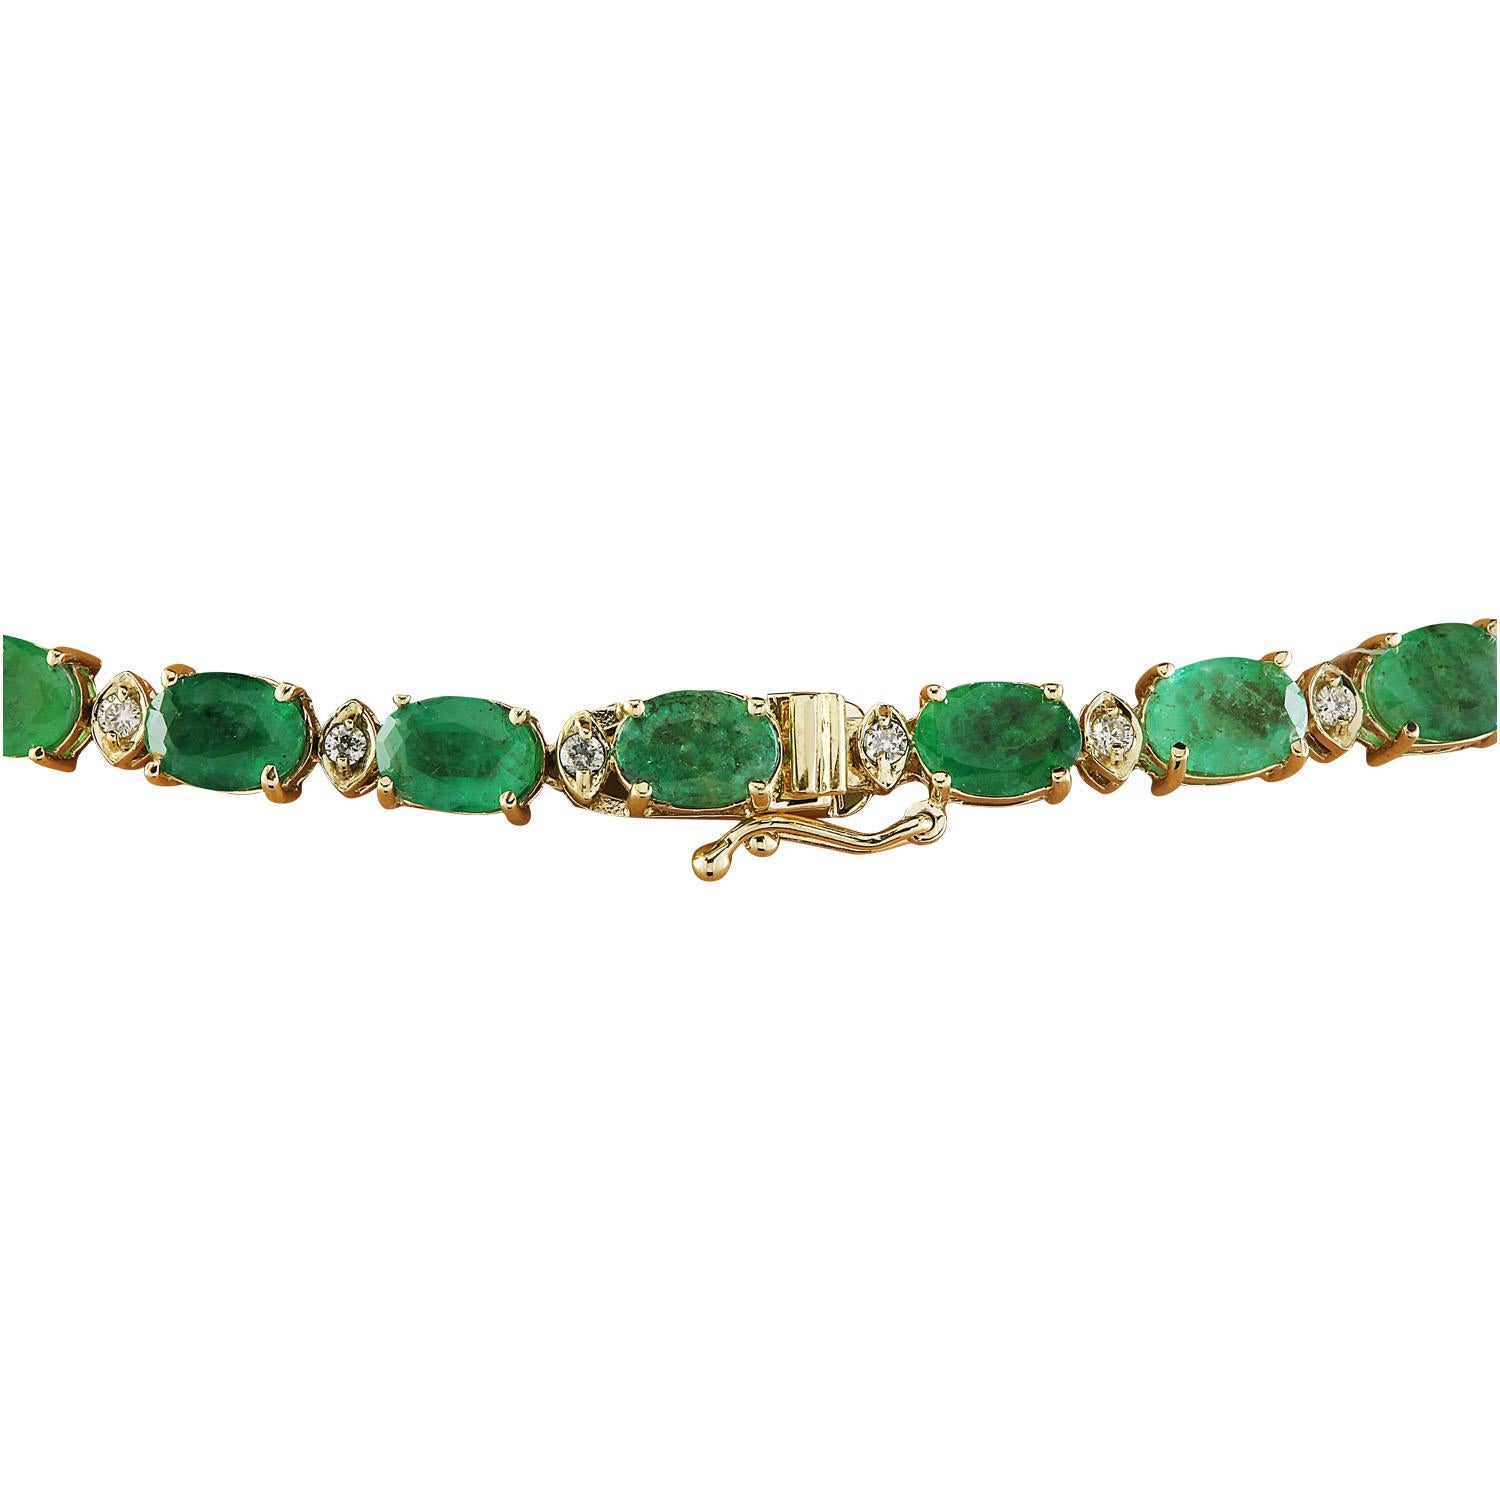 23.82 Carat Natural Emerald 14 Karat Solid Yellow Gold Diamond Necklace
Stamped: 14K
Total Necklace Weight: 21 Grams
Necklace Length: 18.5 Inches
Emerald Weight: 22.62 Carat (6.00x4.00 Millimeters)
Diamond Weight: 1.20 Carat (F-G Color, VS2-SI1